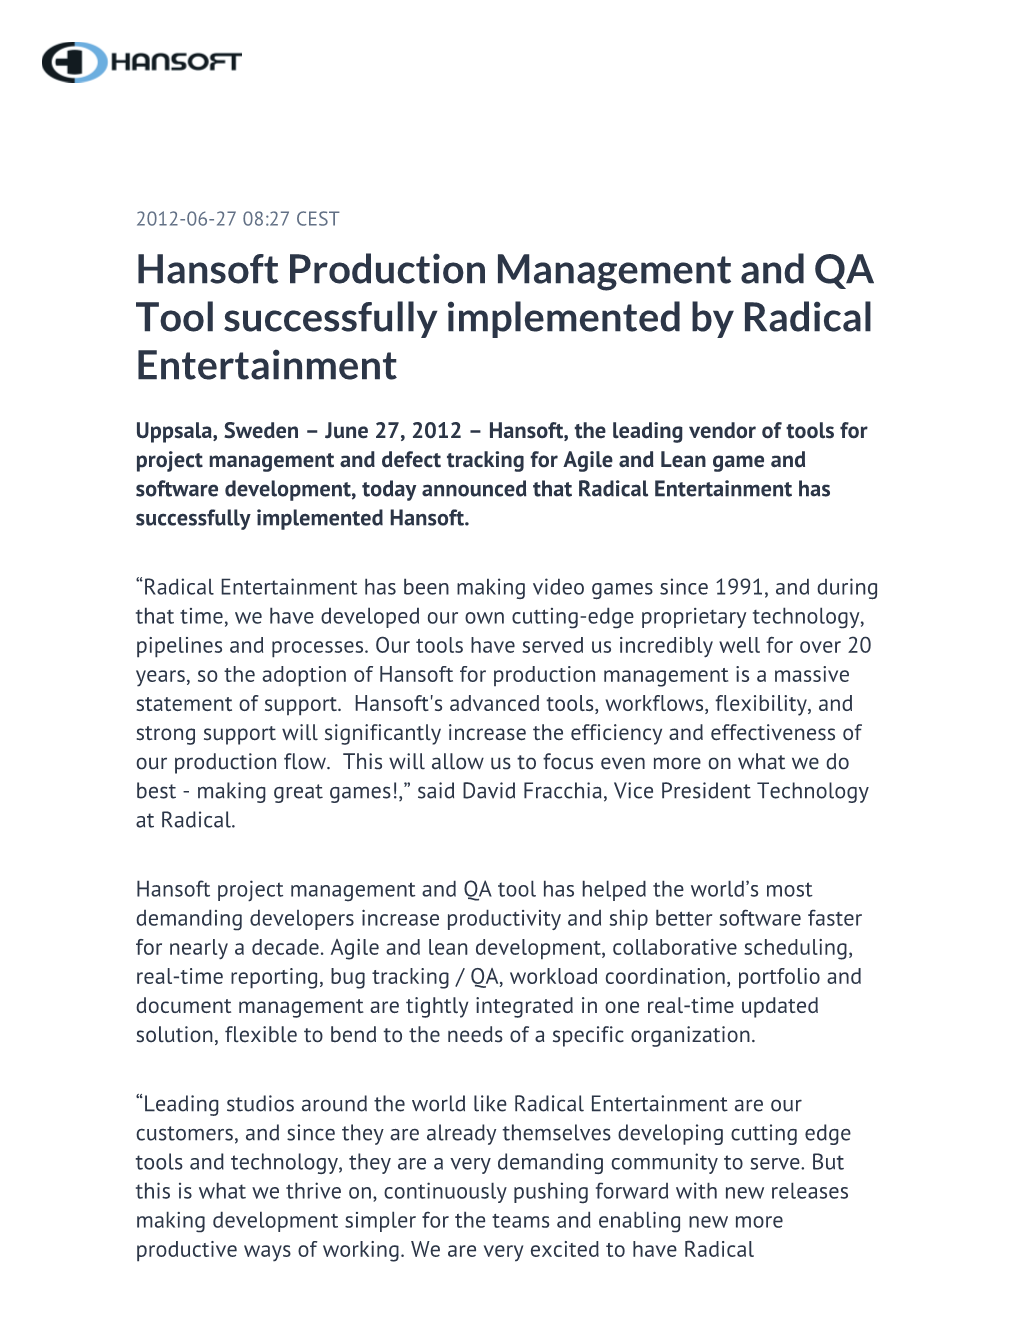 Hansoft Production Management and QA Tool Successfully Implemented by Radical Entertainment